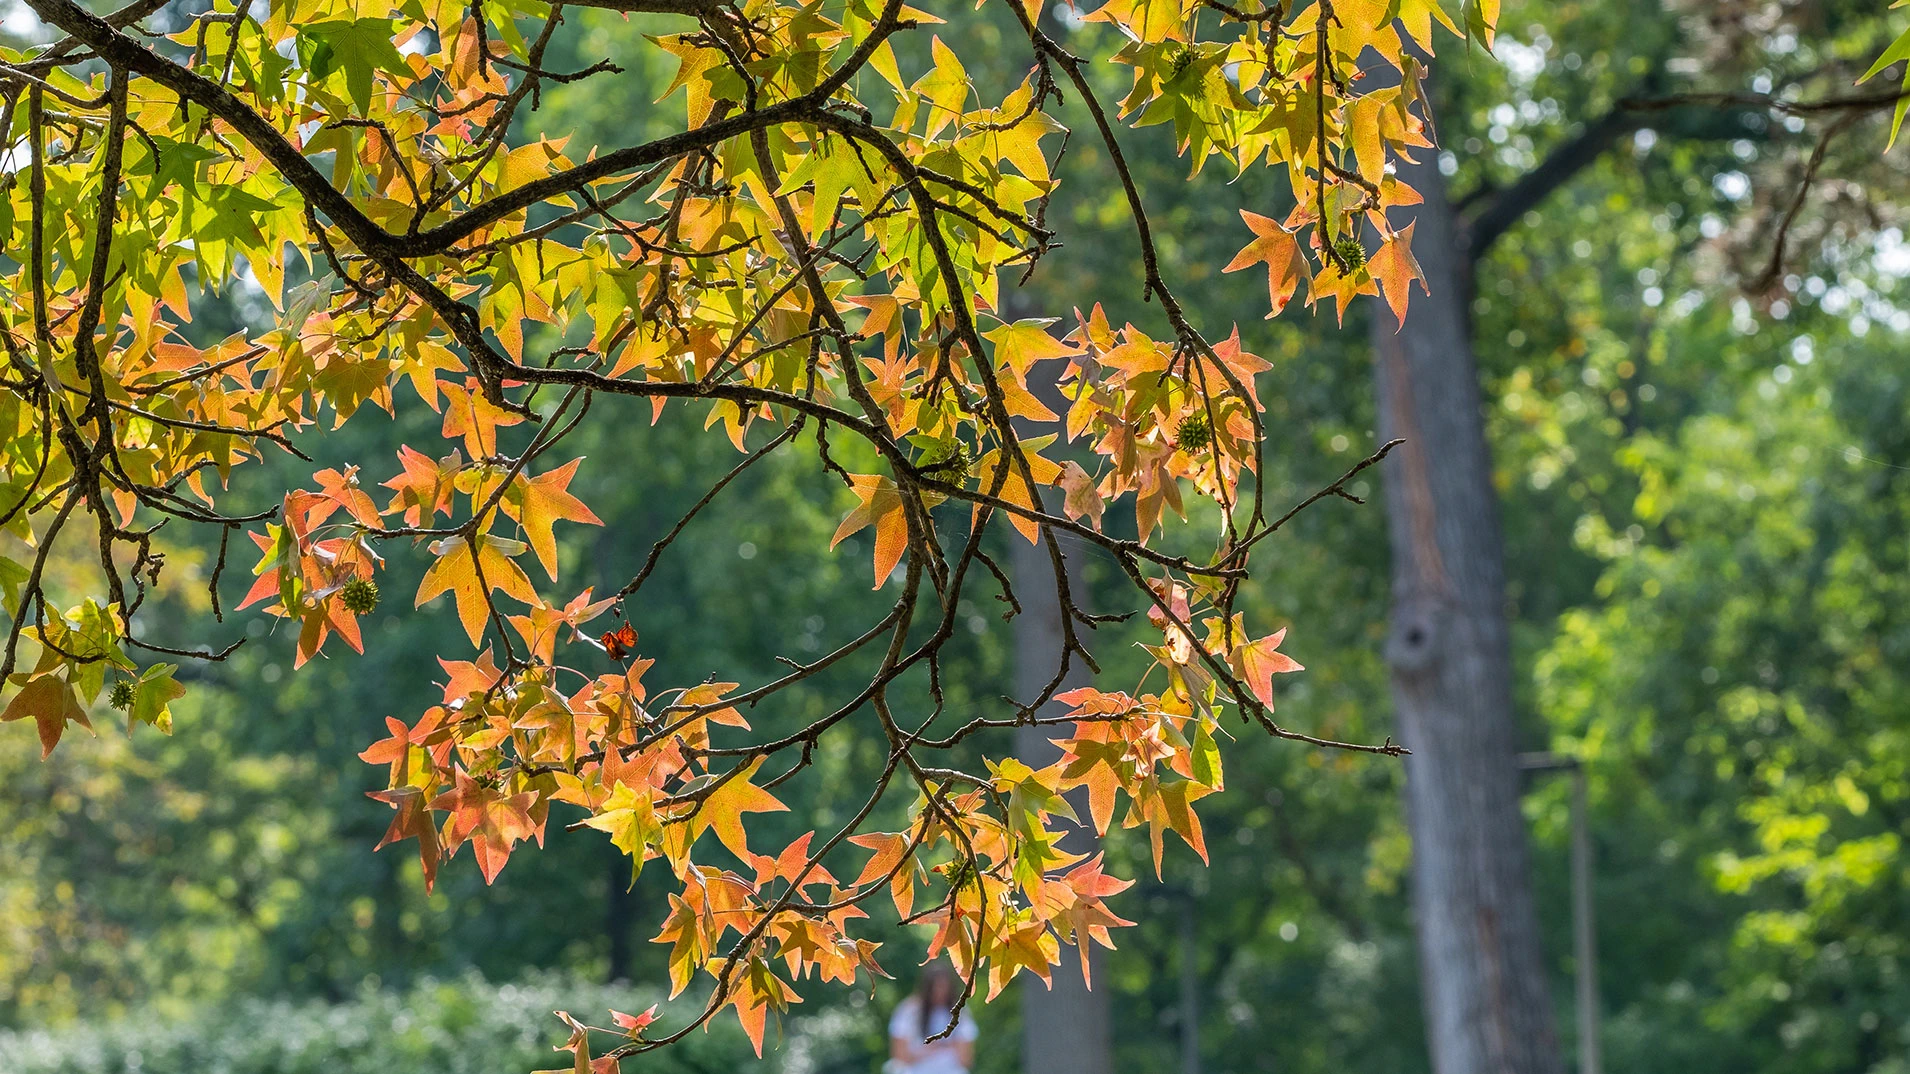 Orange to green leaves on a tree branch